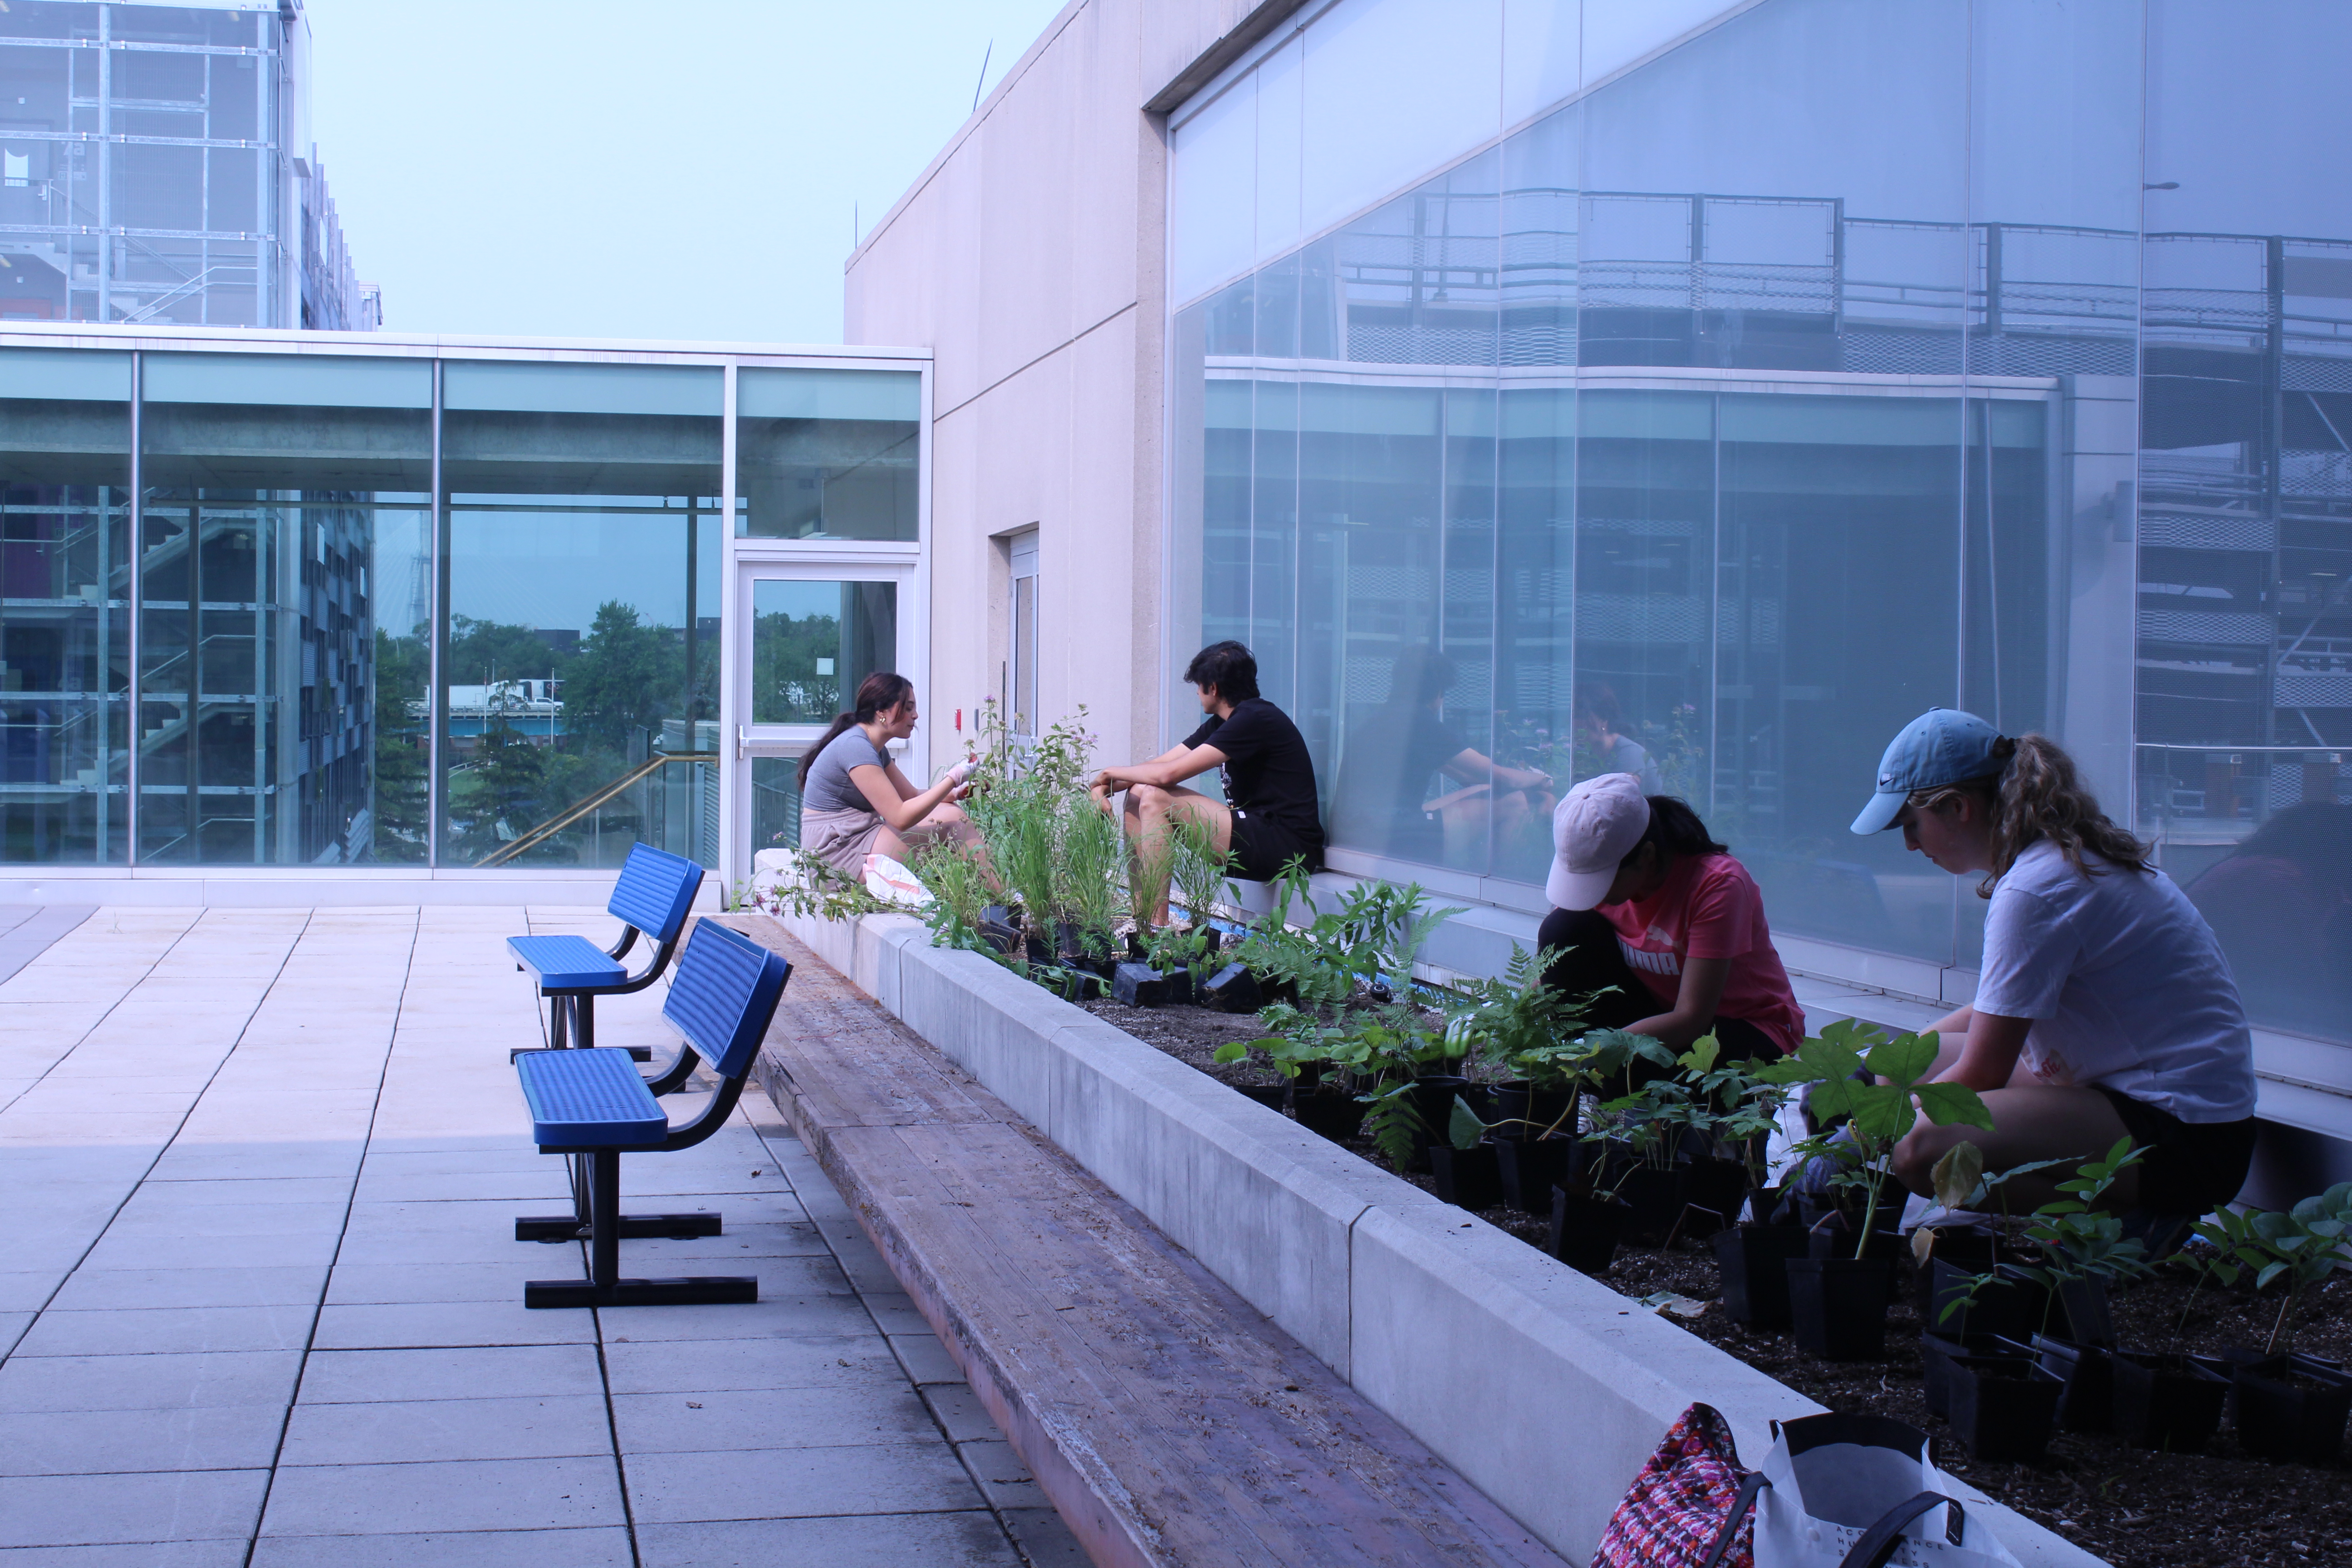 Students planting flowers in a rooftop garden